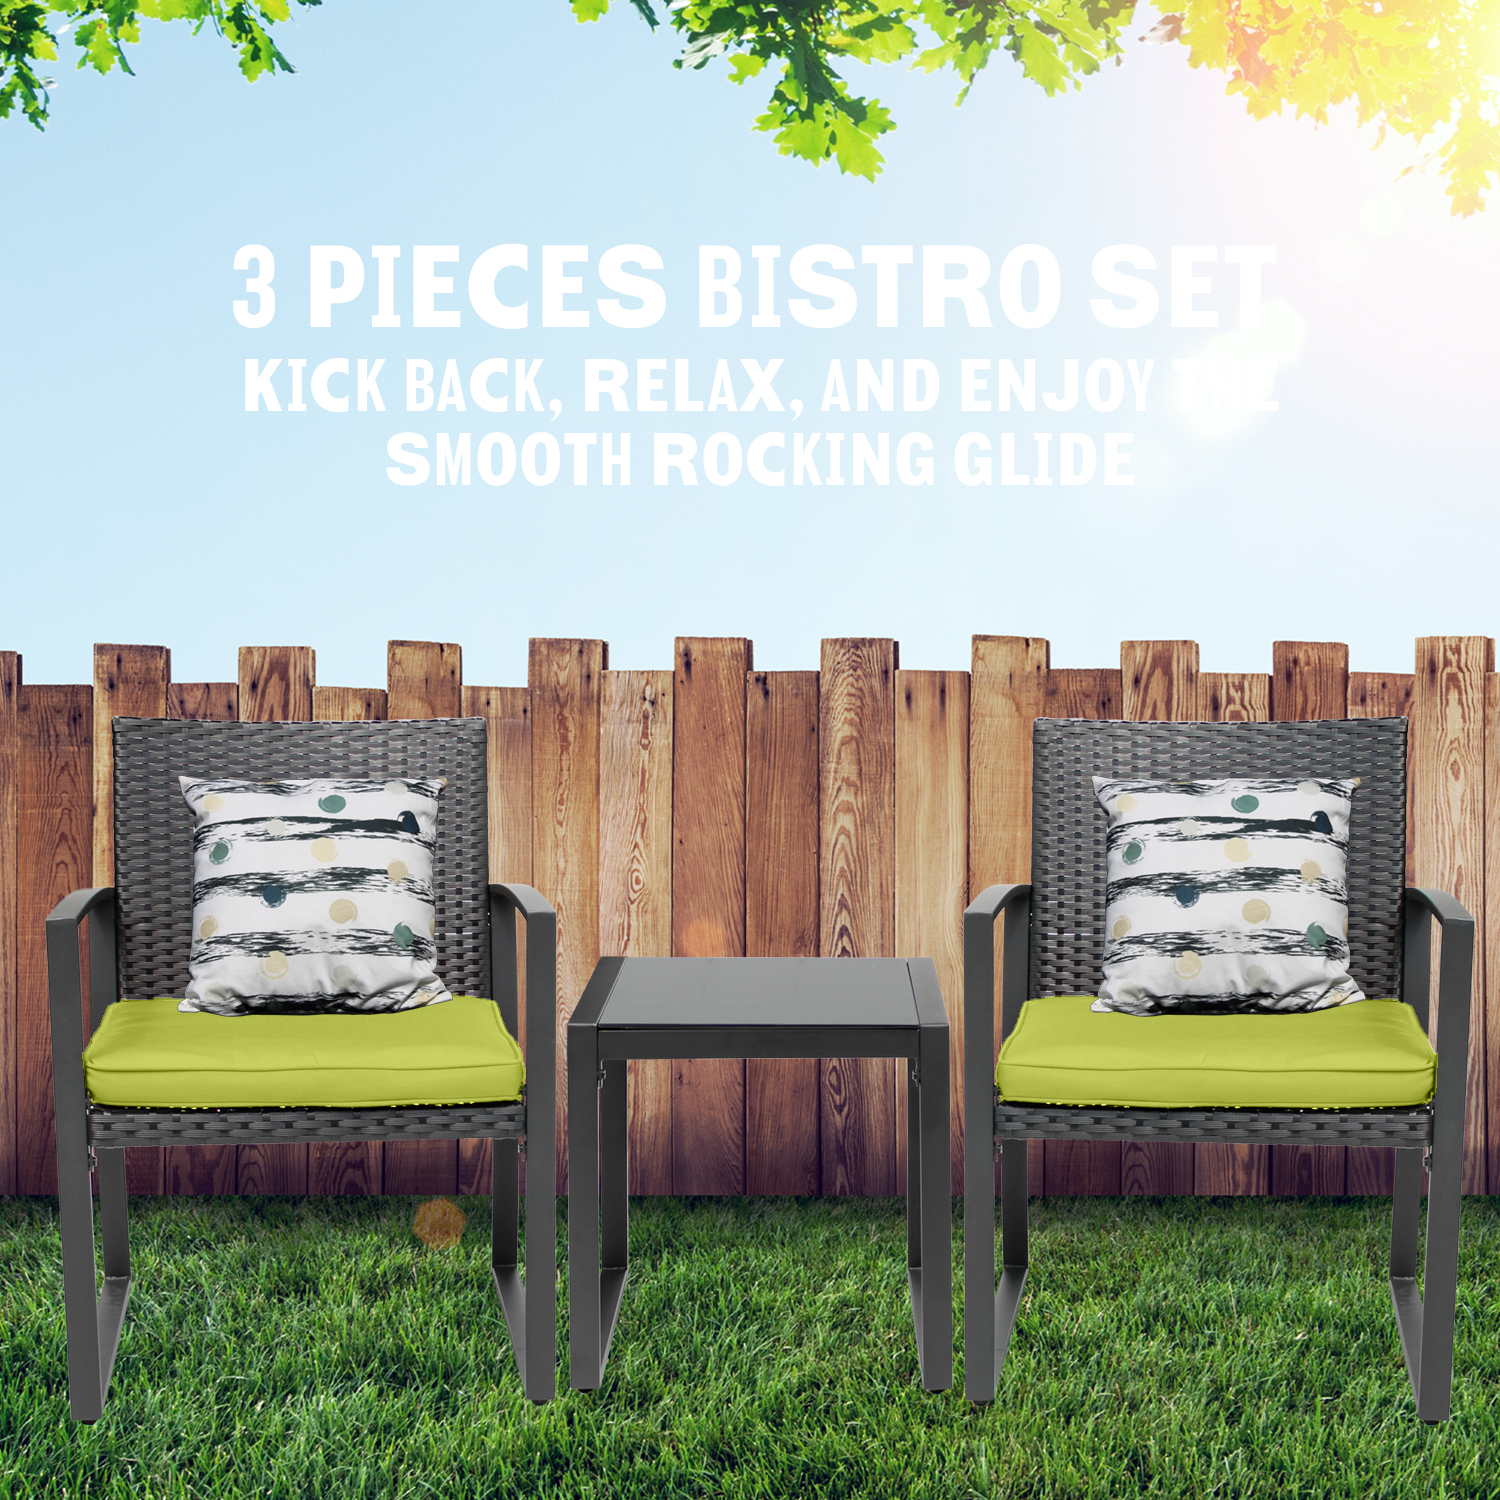 Outdoor 3-Piece Dialog Bistro Set Black Wicker Furniture-Two Chairs with Glass Coffee Table Green - image 5 of 7